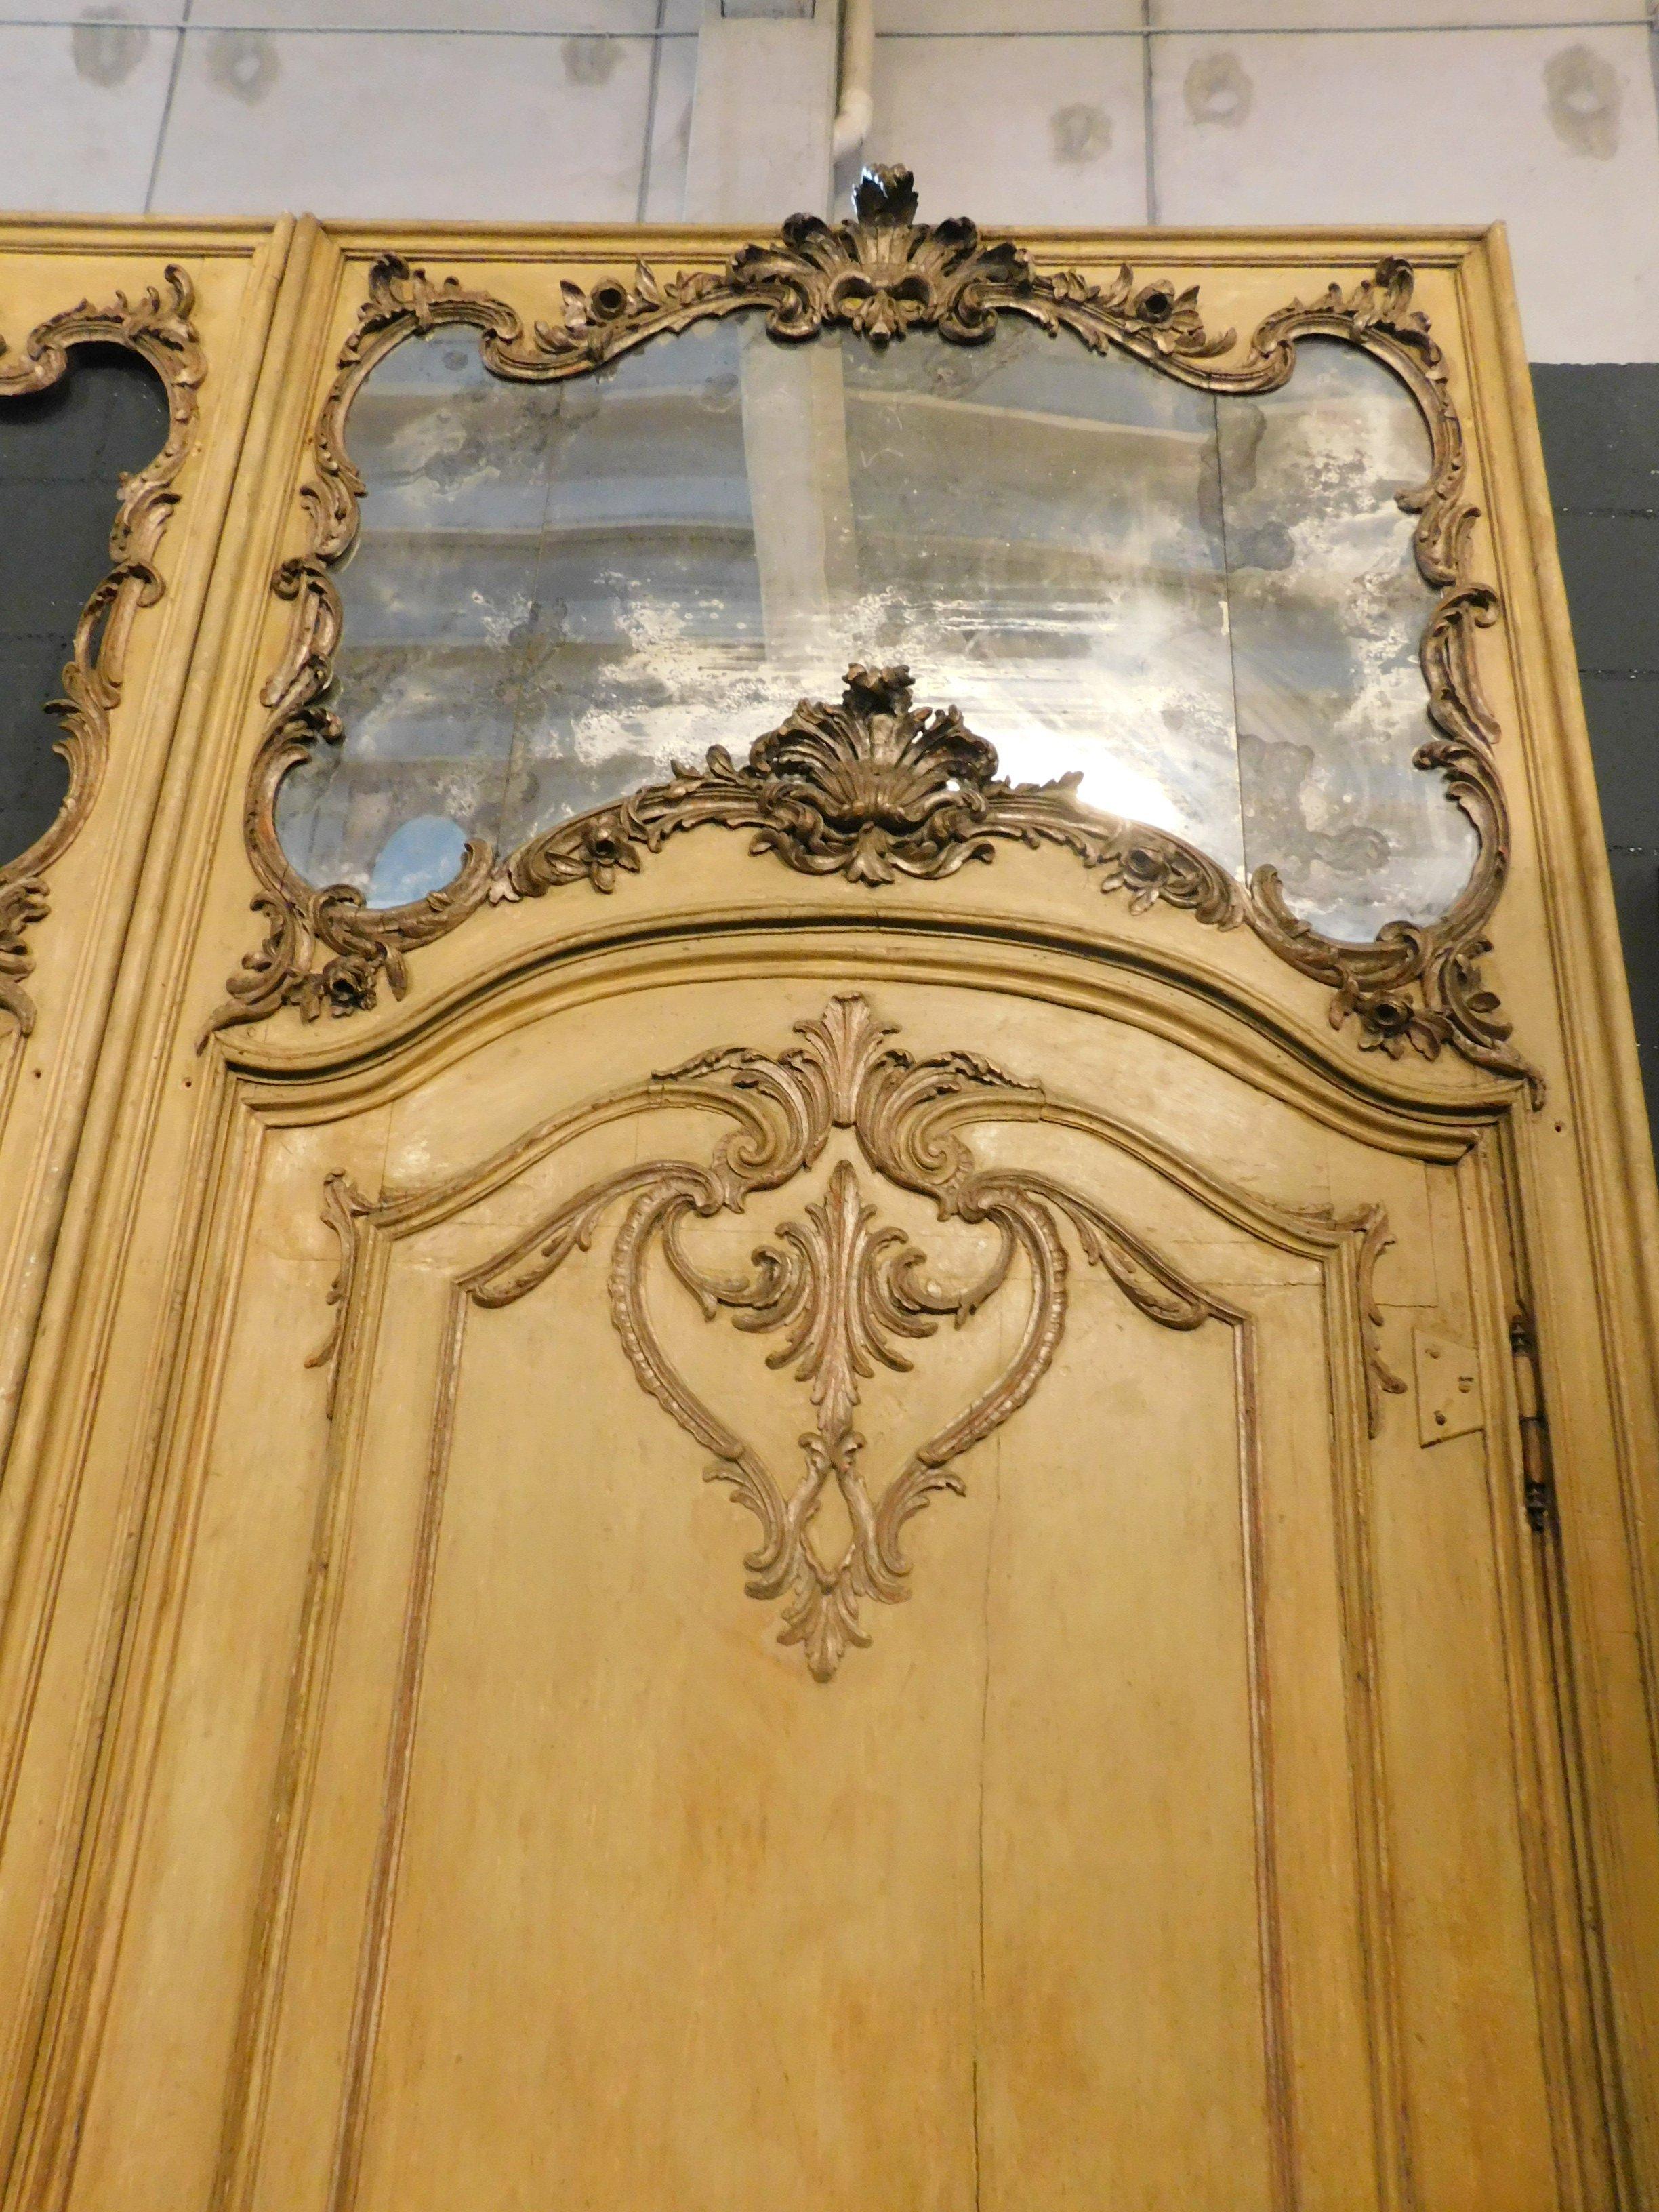 2 Antiques Baroque Doors Lacquered Yellow and Gilded, Mirror Updoor, 1700 Italy For Sale 2